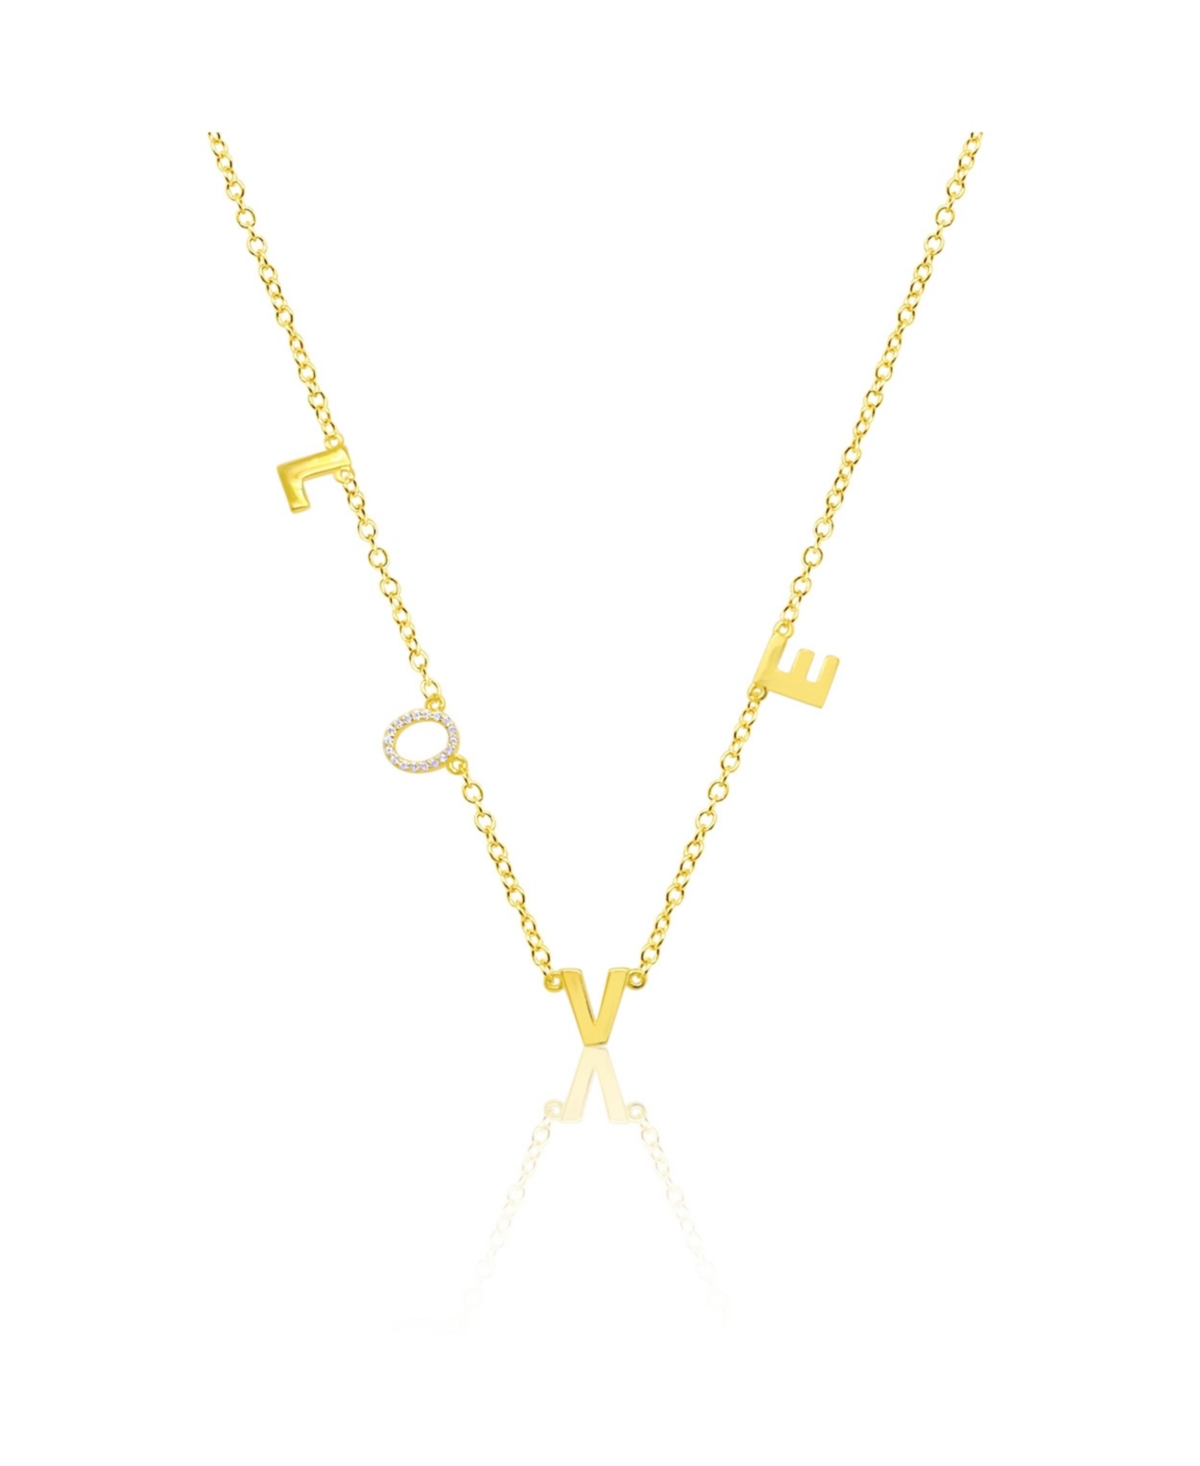 Yellow Gold Tone Cz Love Charm Necklace - Yellow